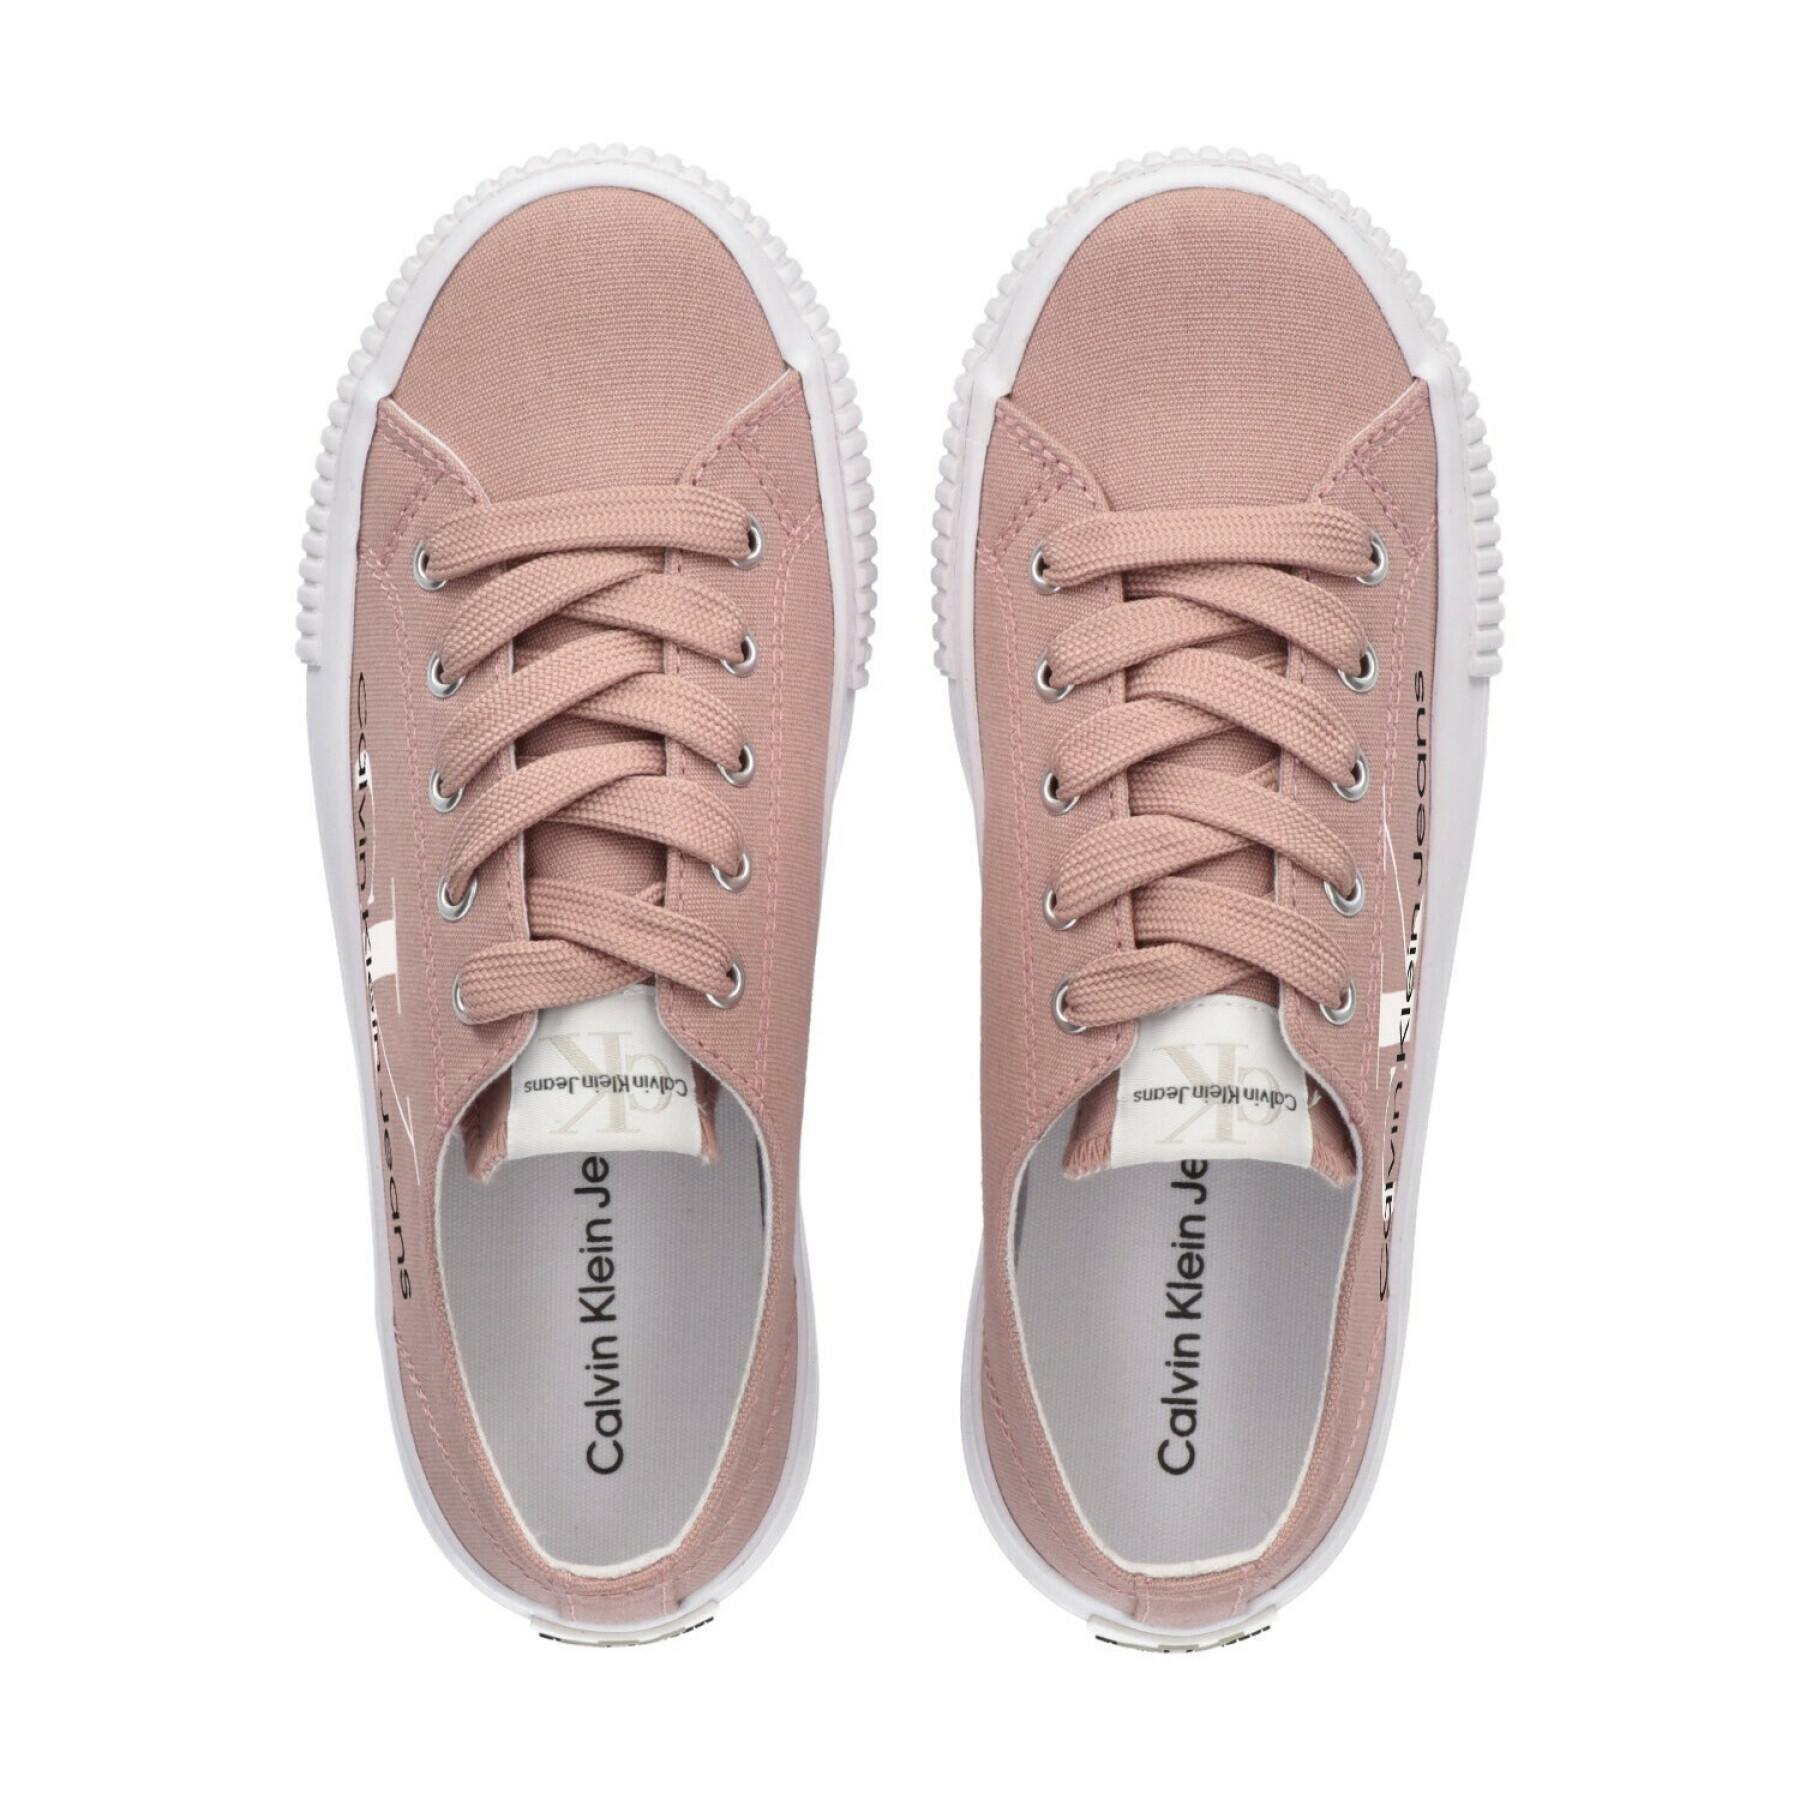 Low lace-up sneakers for girls Calvin Klein